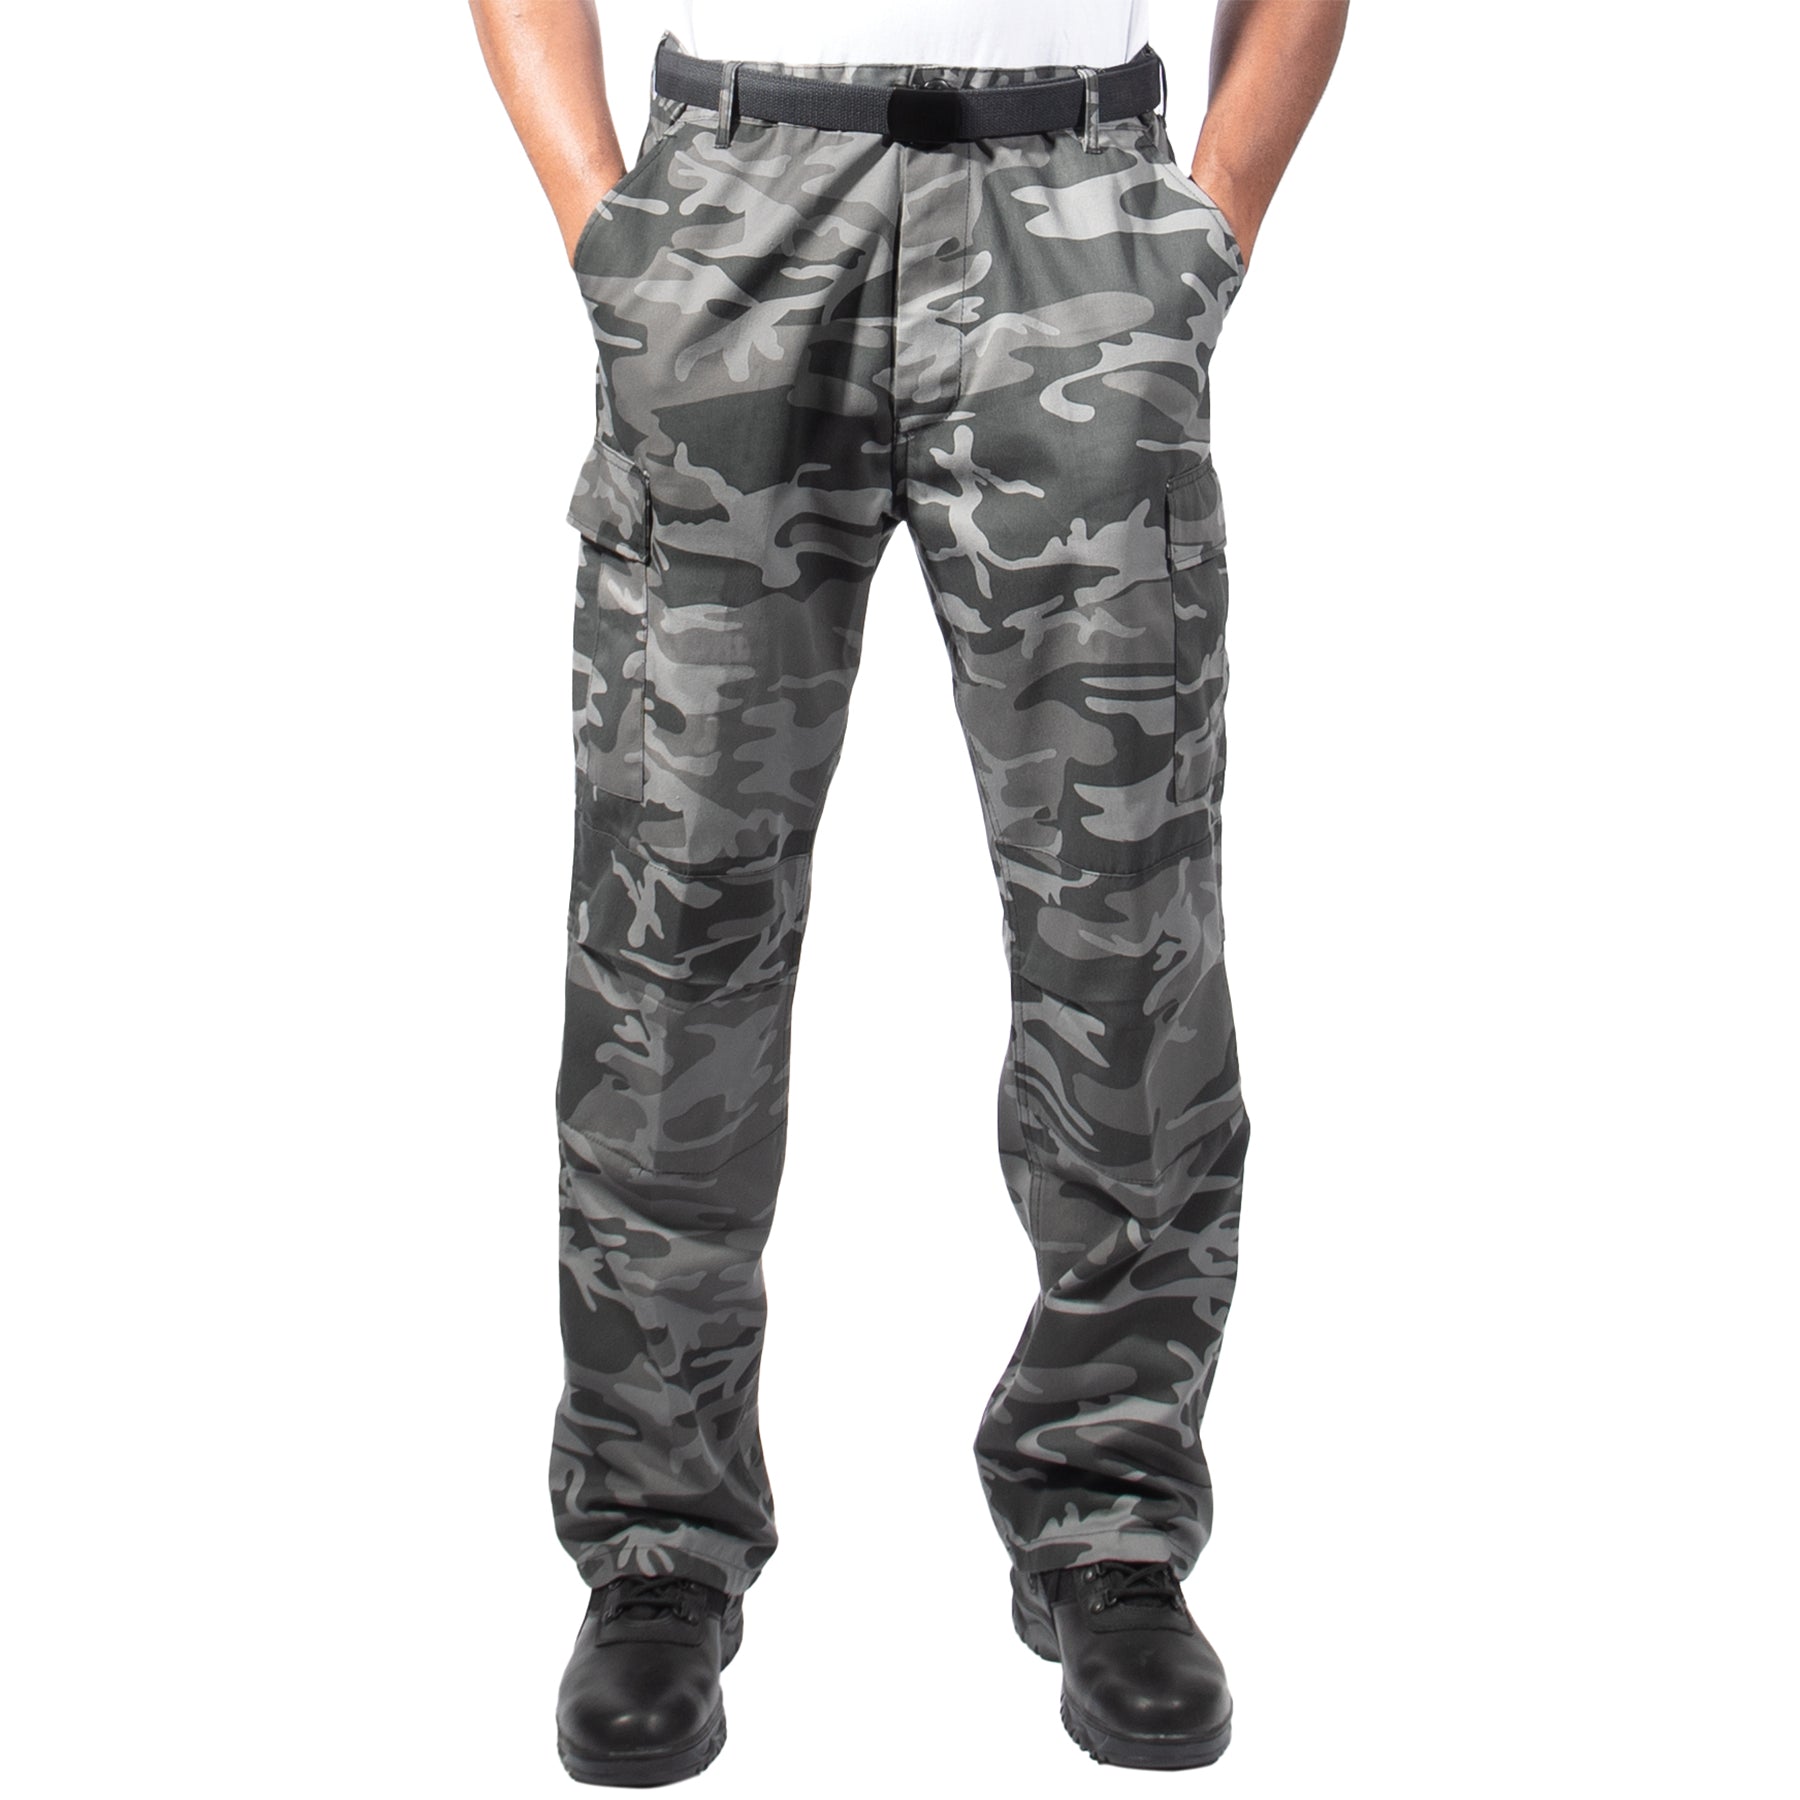 [Relaxed Fit Zipper Fly] Camo Poly/Cotton Tactical BDU Pants Black Camo